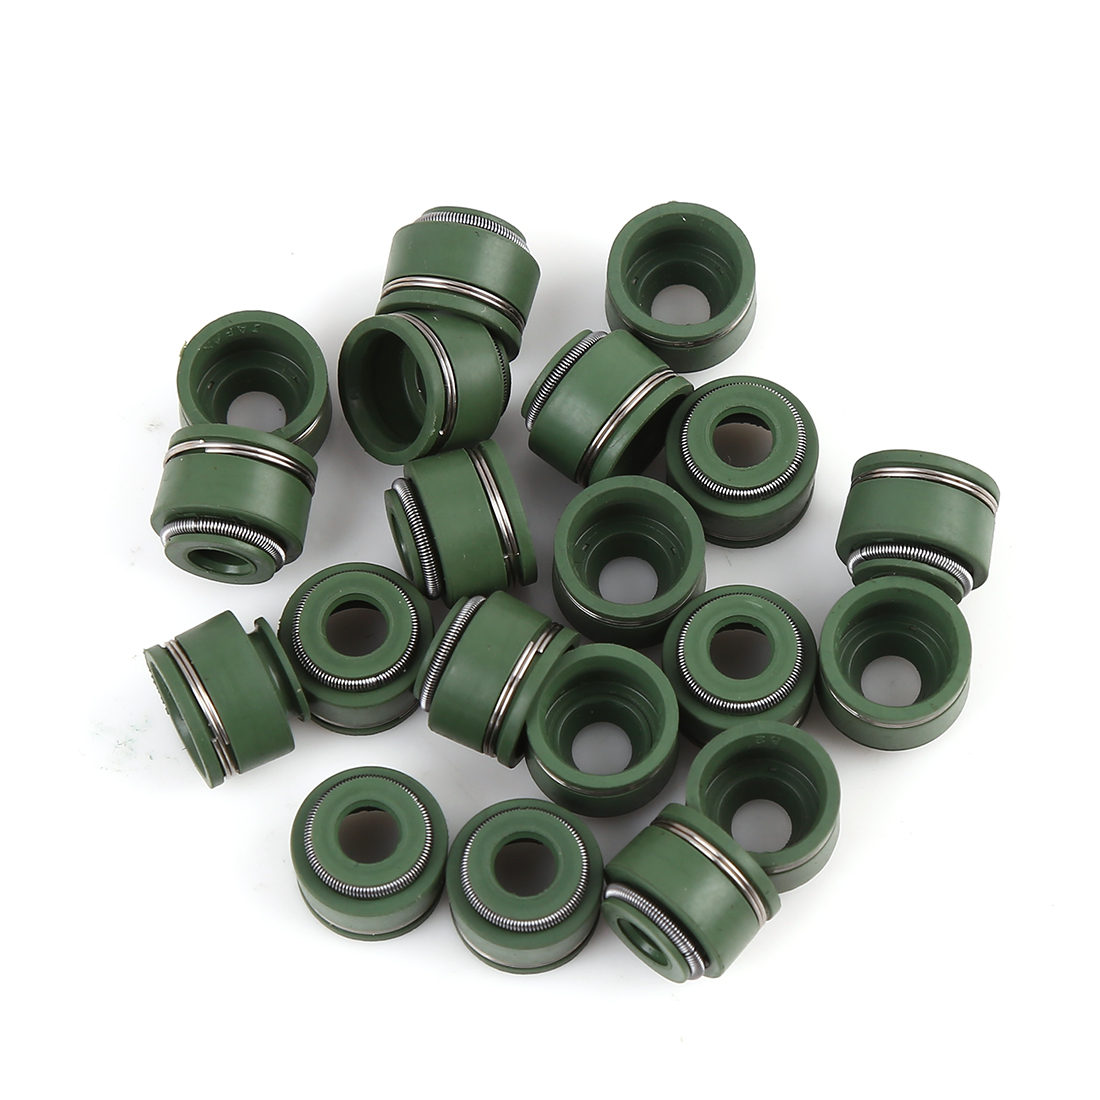 Unique Bargains 20pcs Green Metal Rubber Motorcycle Intake Exhaust Valve Oil Seal for CG-125